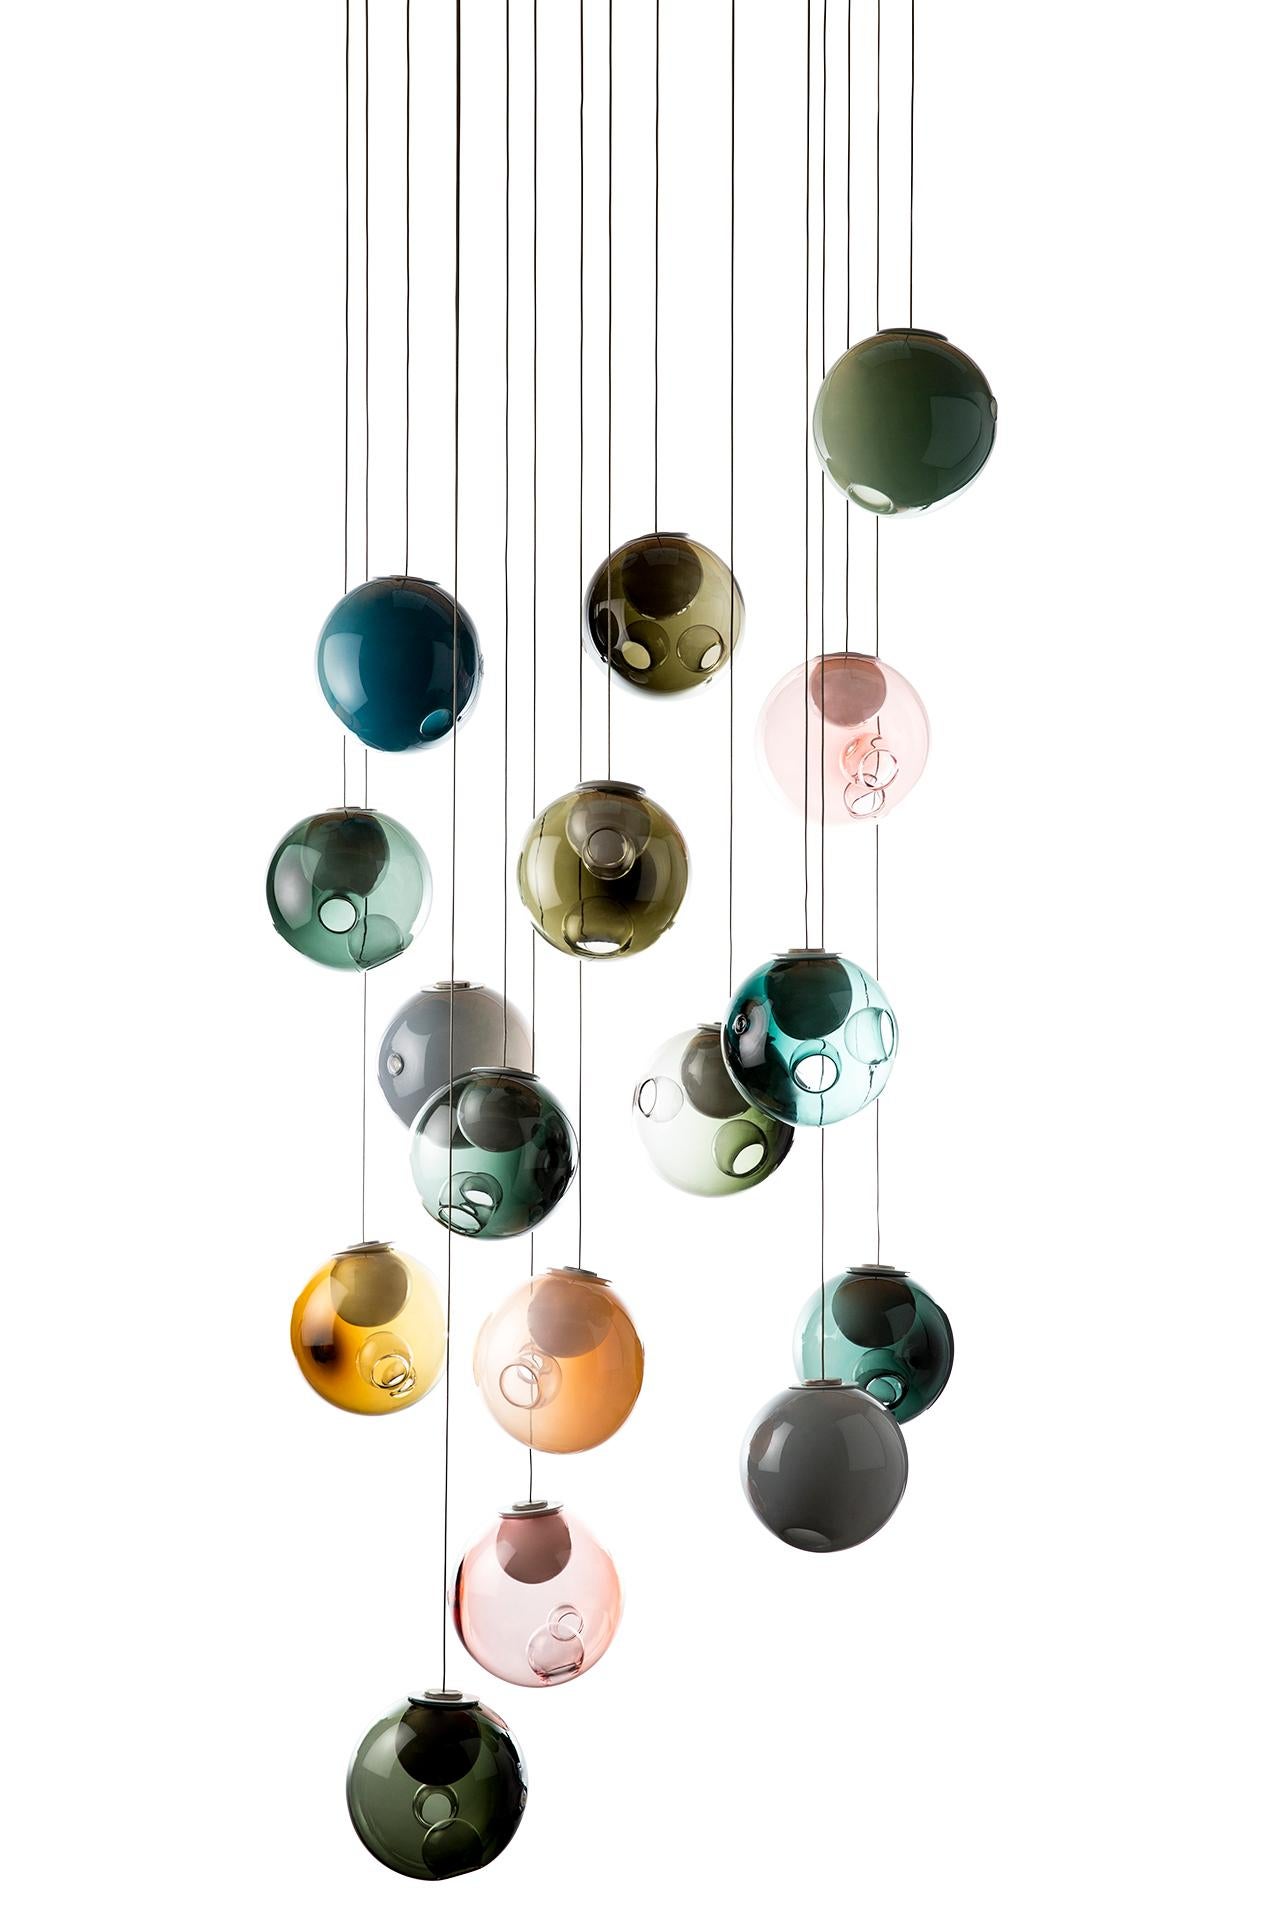 The 28.16 random color is a chandelier composed of 16 mouth blown spheres in color. There are a possible 64 colors to chose from and the spheres can be transparent color, opaque color or you can chose only to have the 